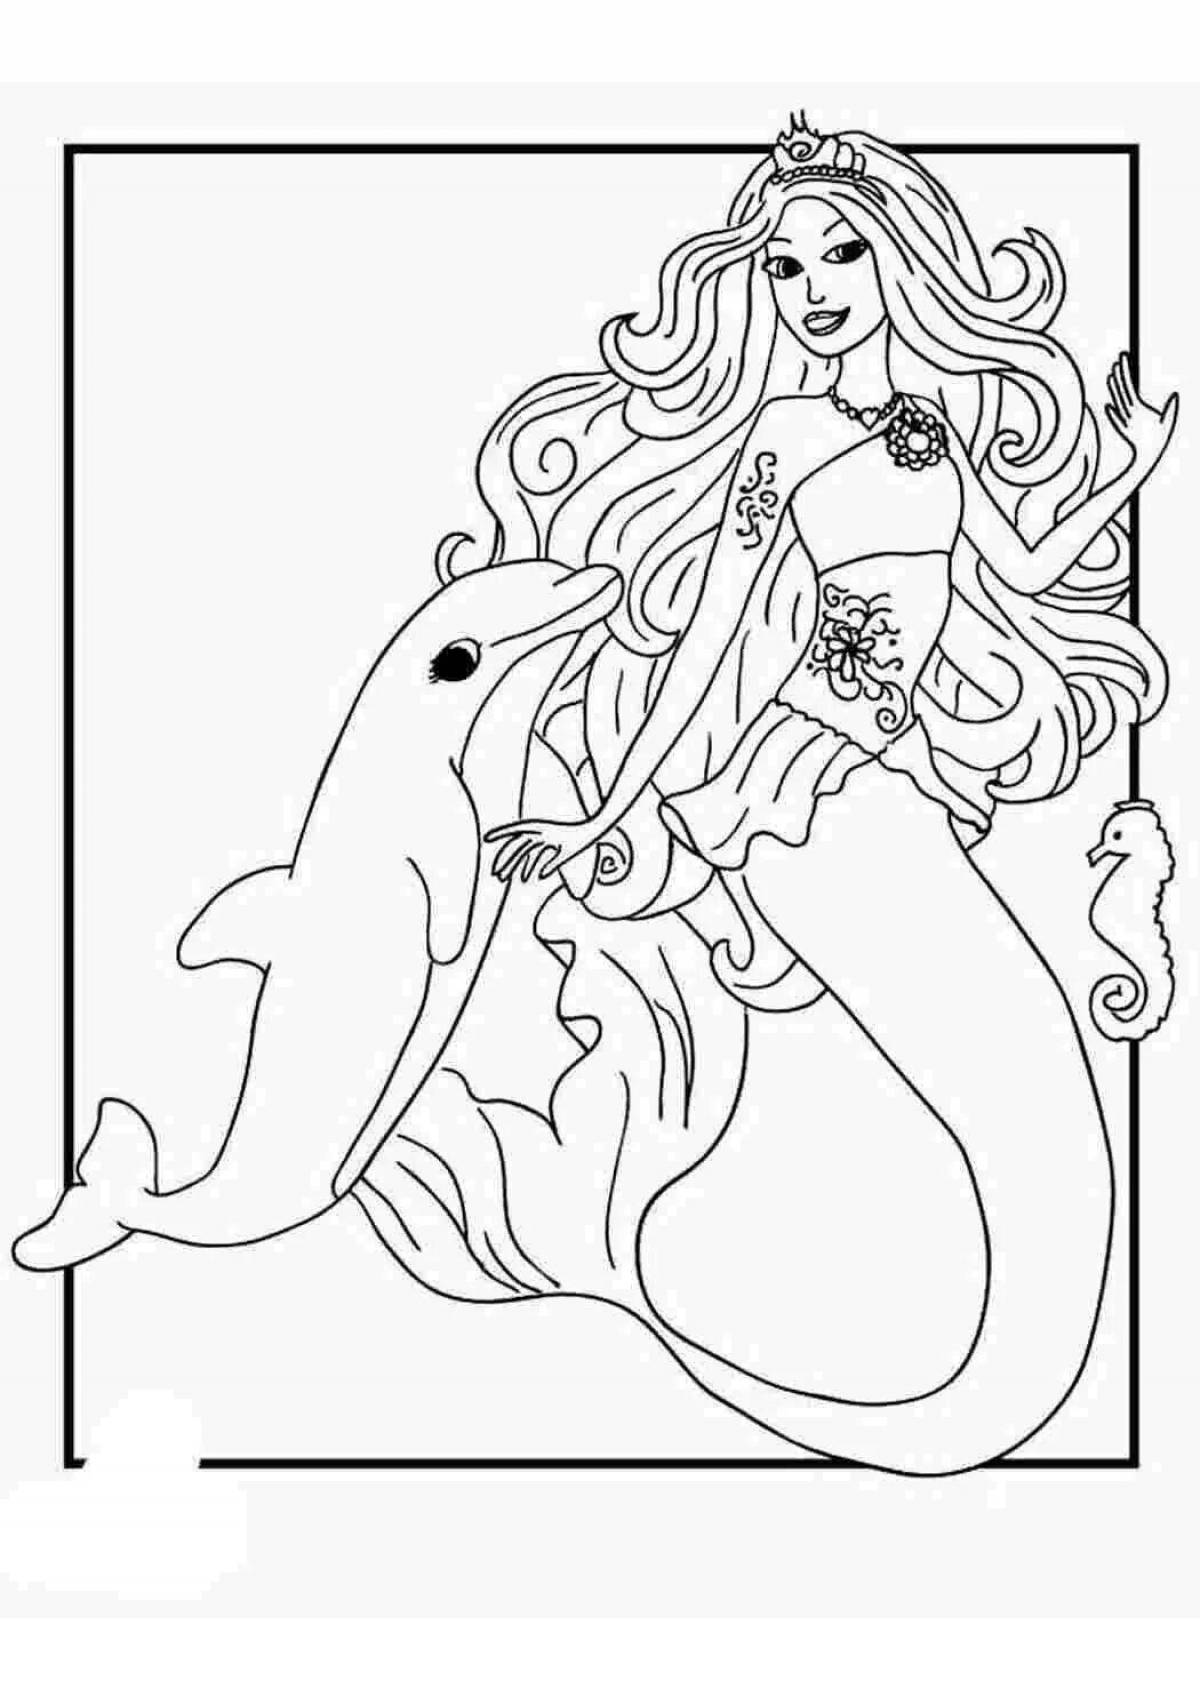 Fun coloring mermaid and dolphin